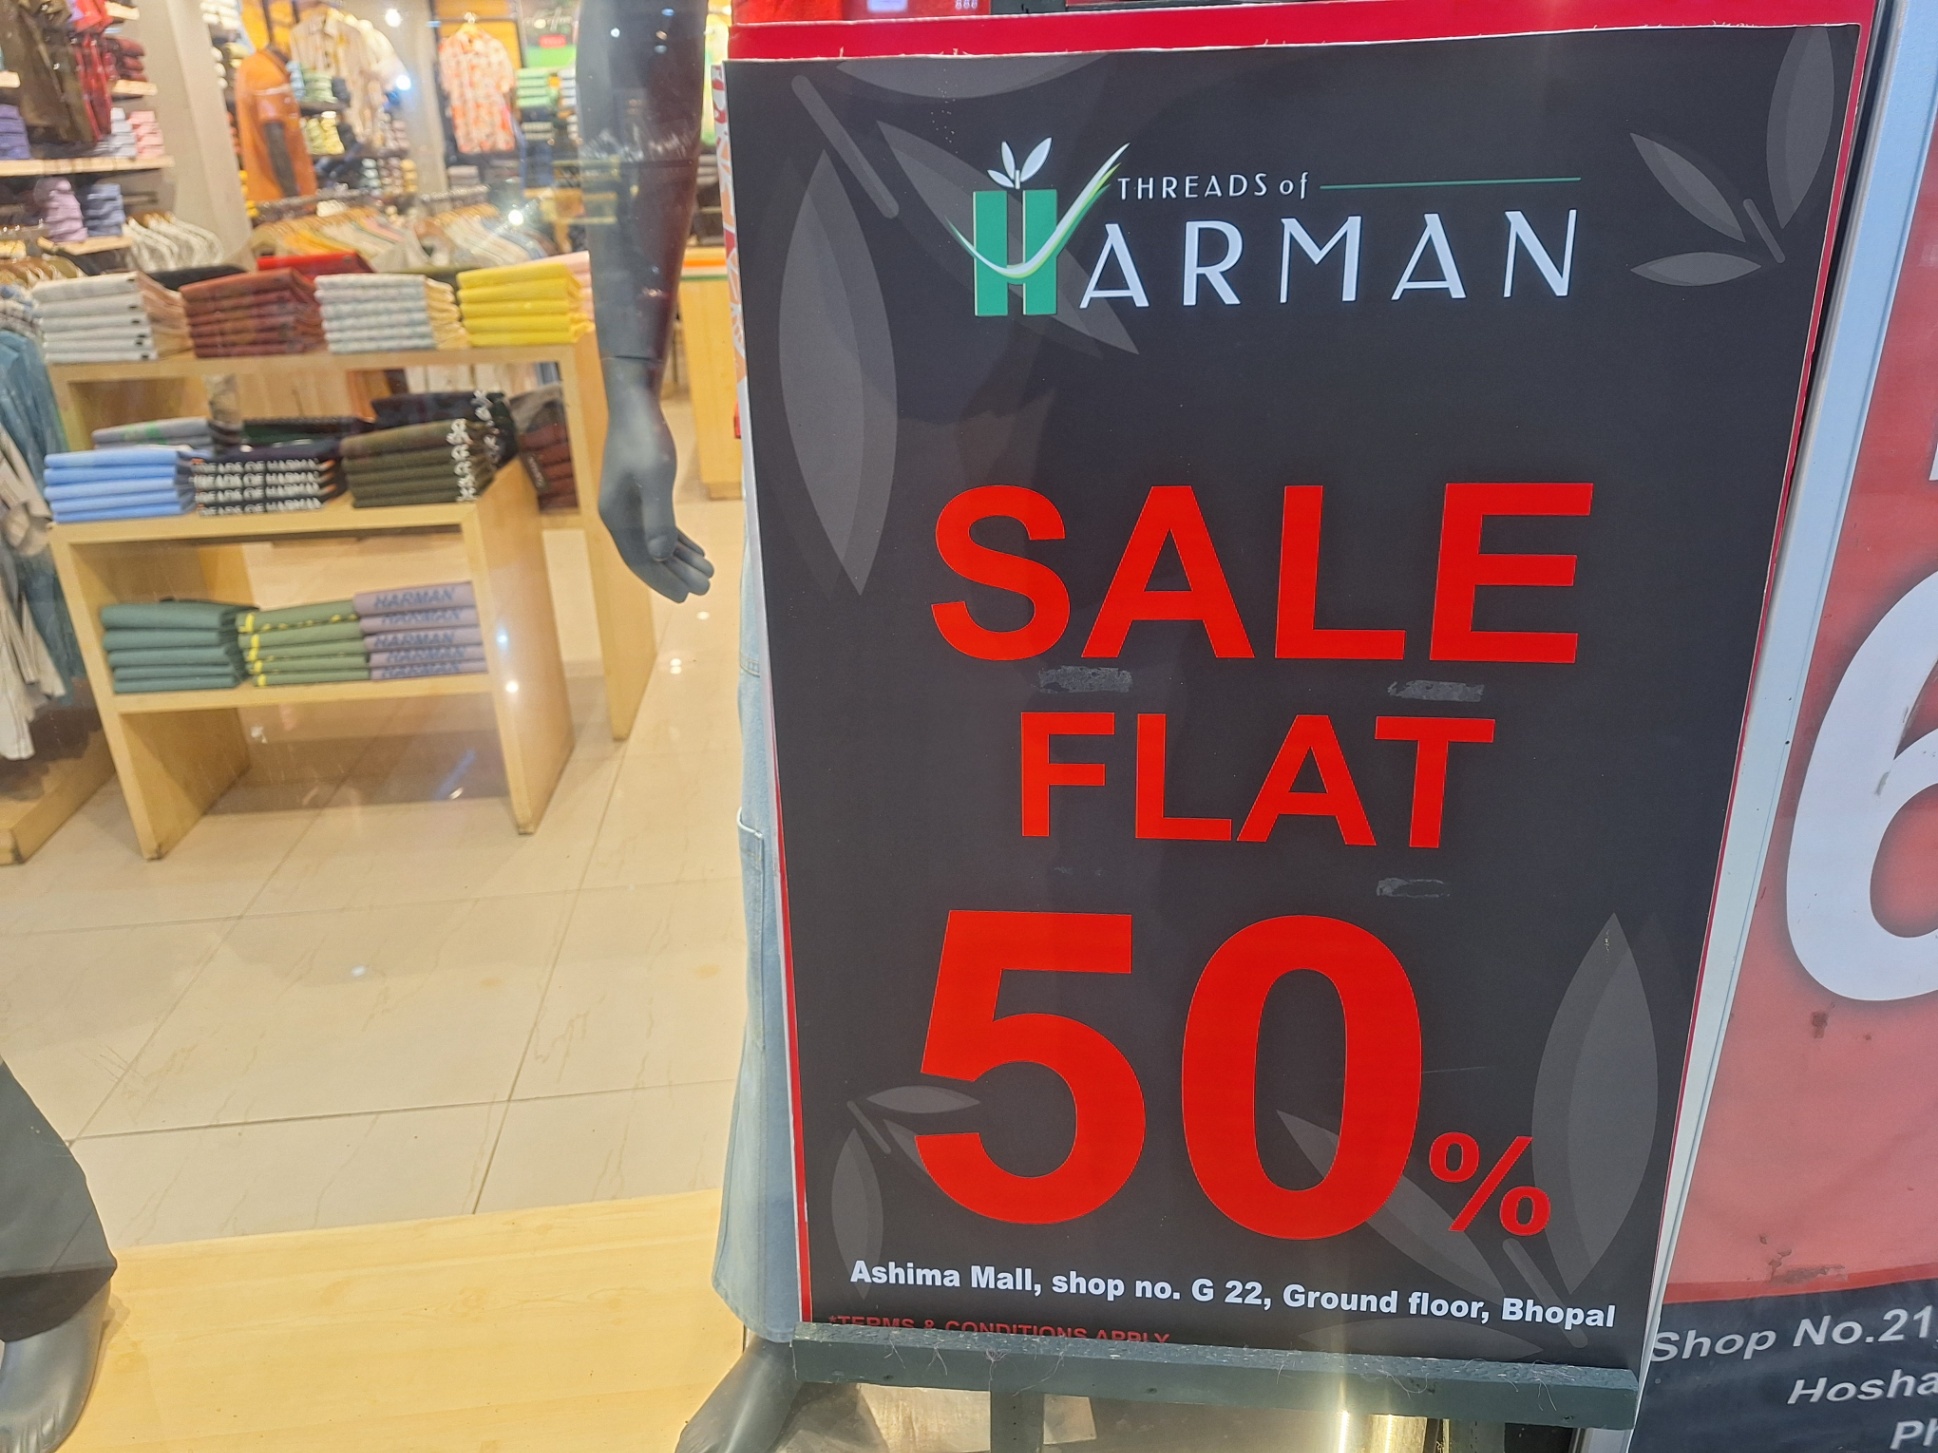 New Deal - Upto 50% Off @Theards of Harman, Bhopal